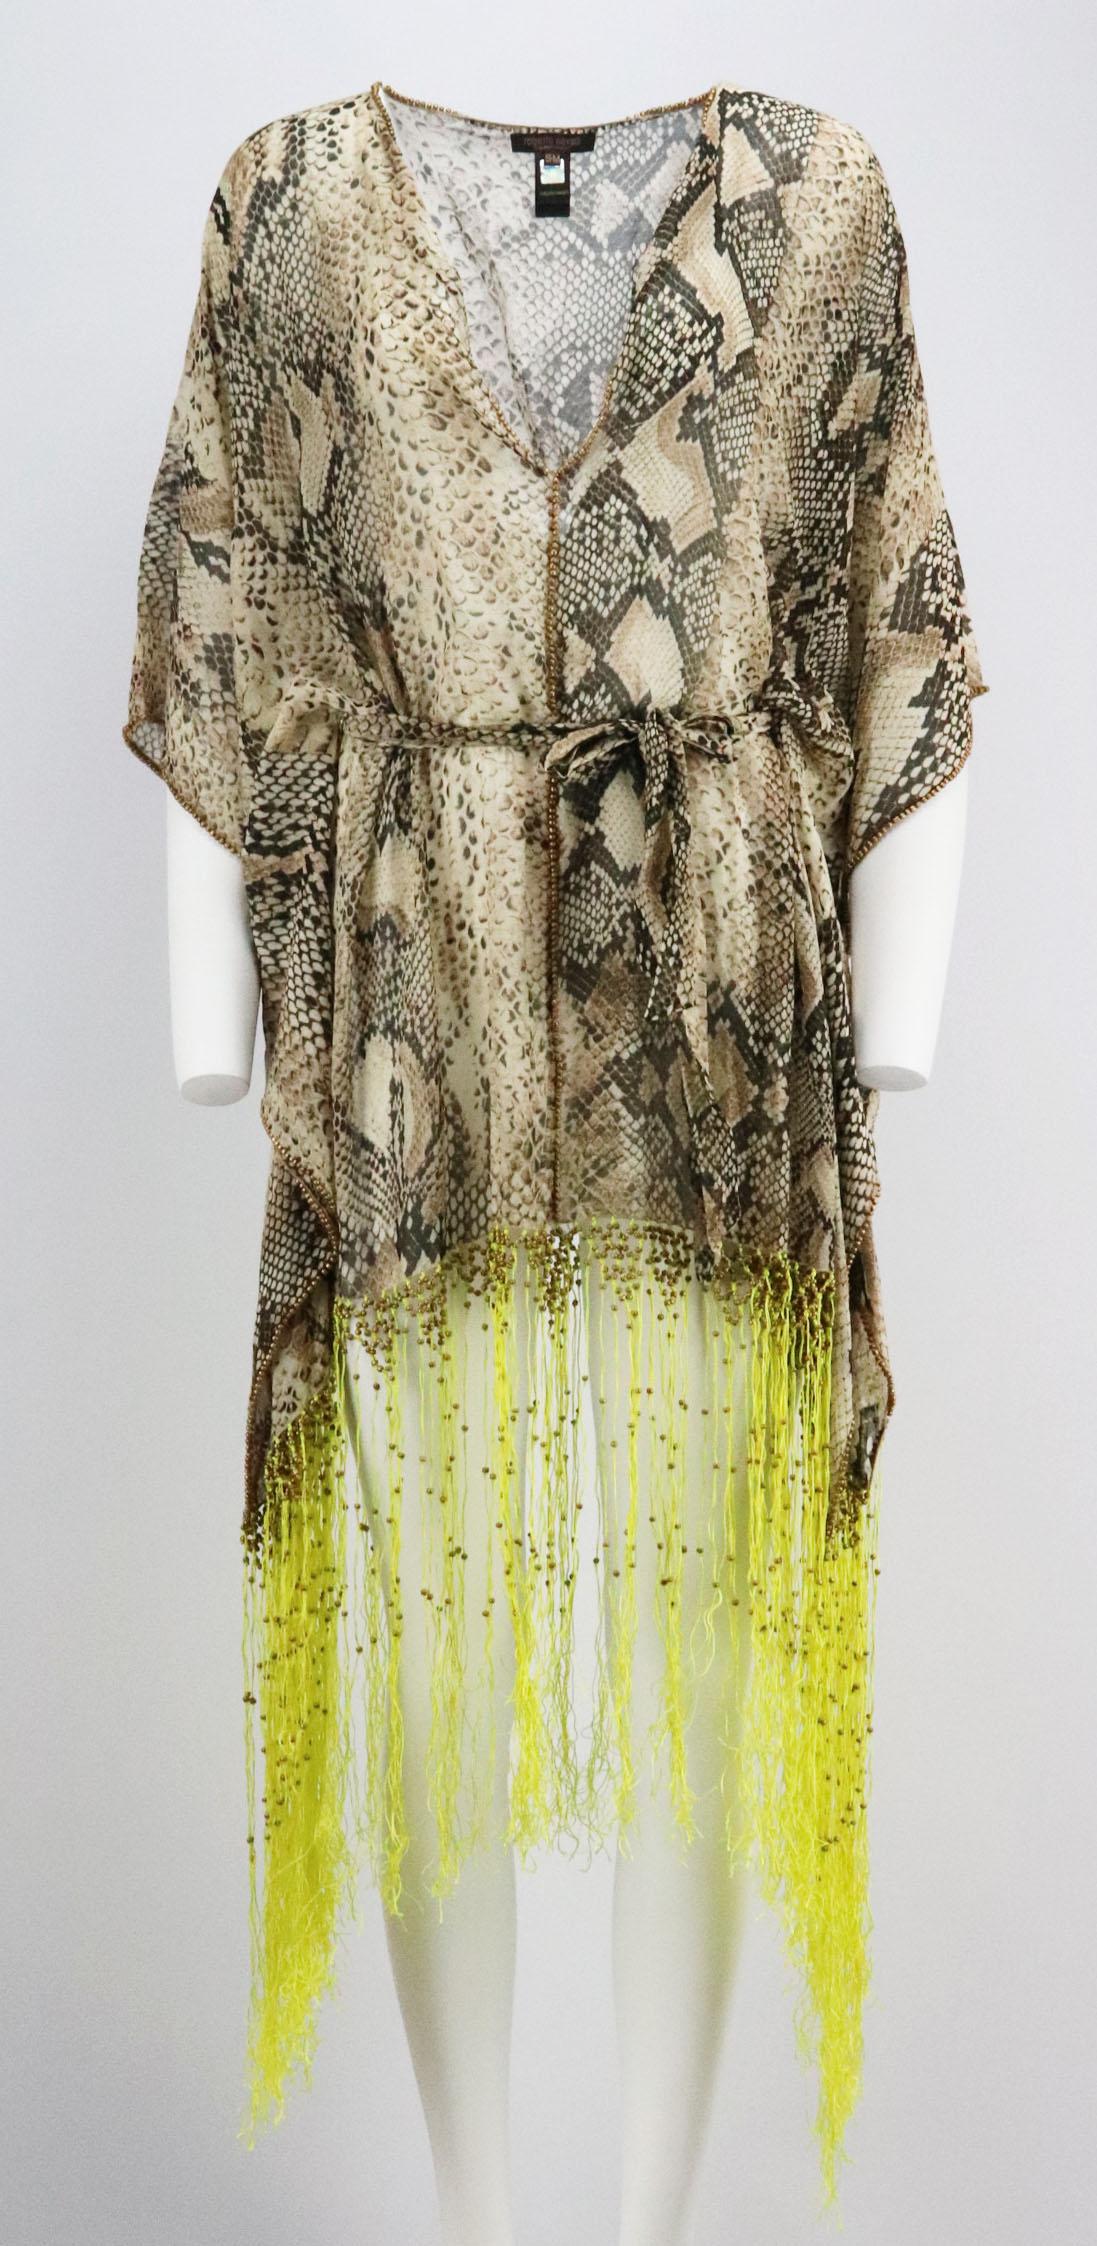 This kaftan by Roberto Cavalli has been made from snake-print cotton and silk-blend and finished with dramatic yellow bead and fringing detail along the edges, cut for a loose silhouette with belt to cinch in the waist.
Grey and black cotton and